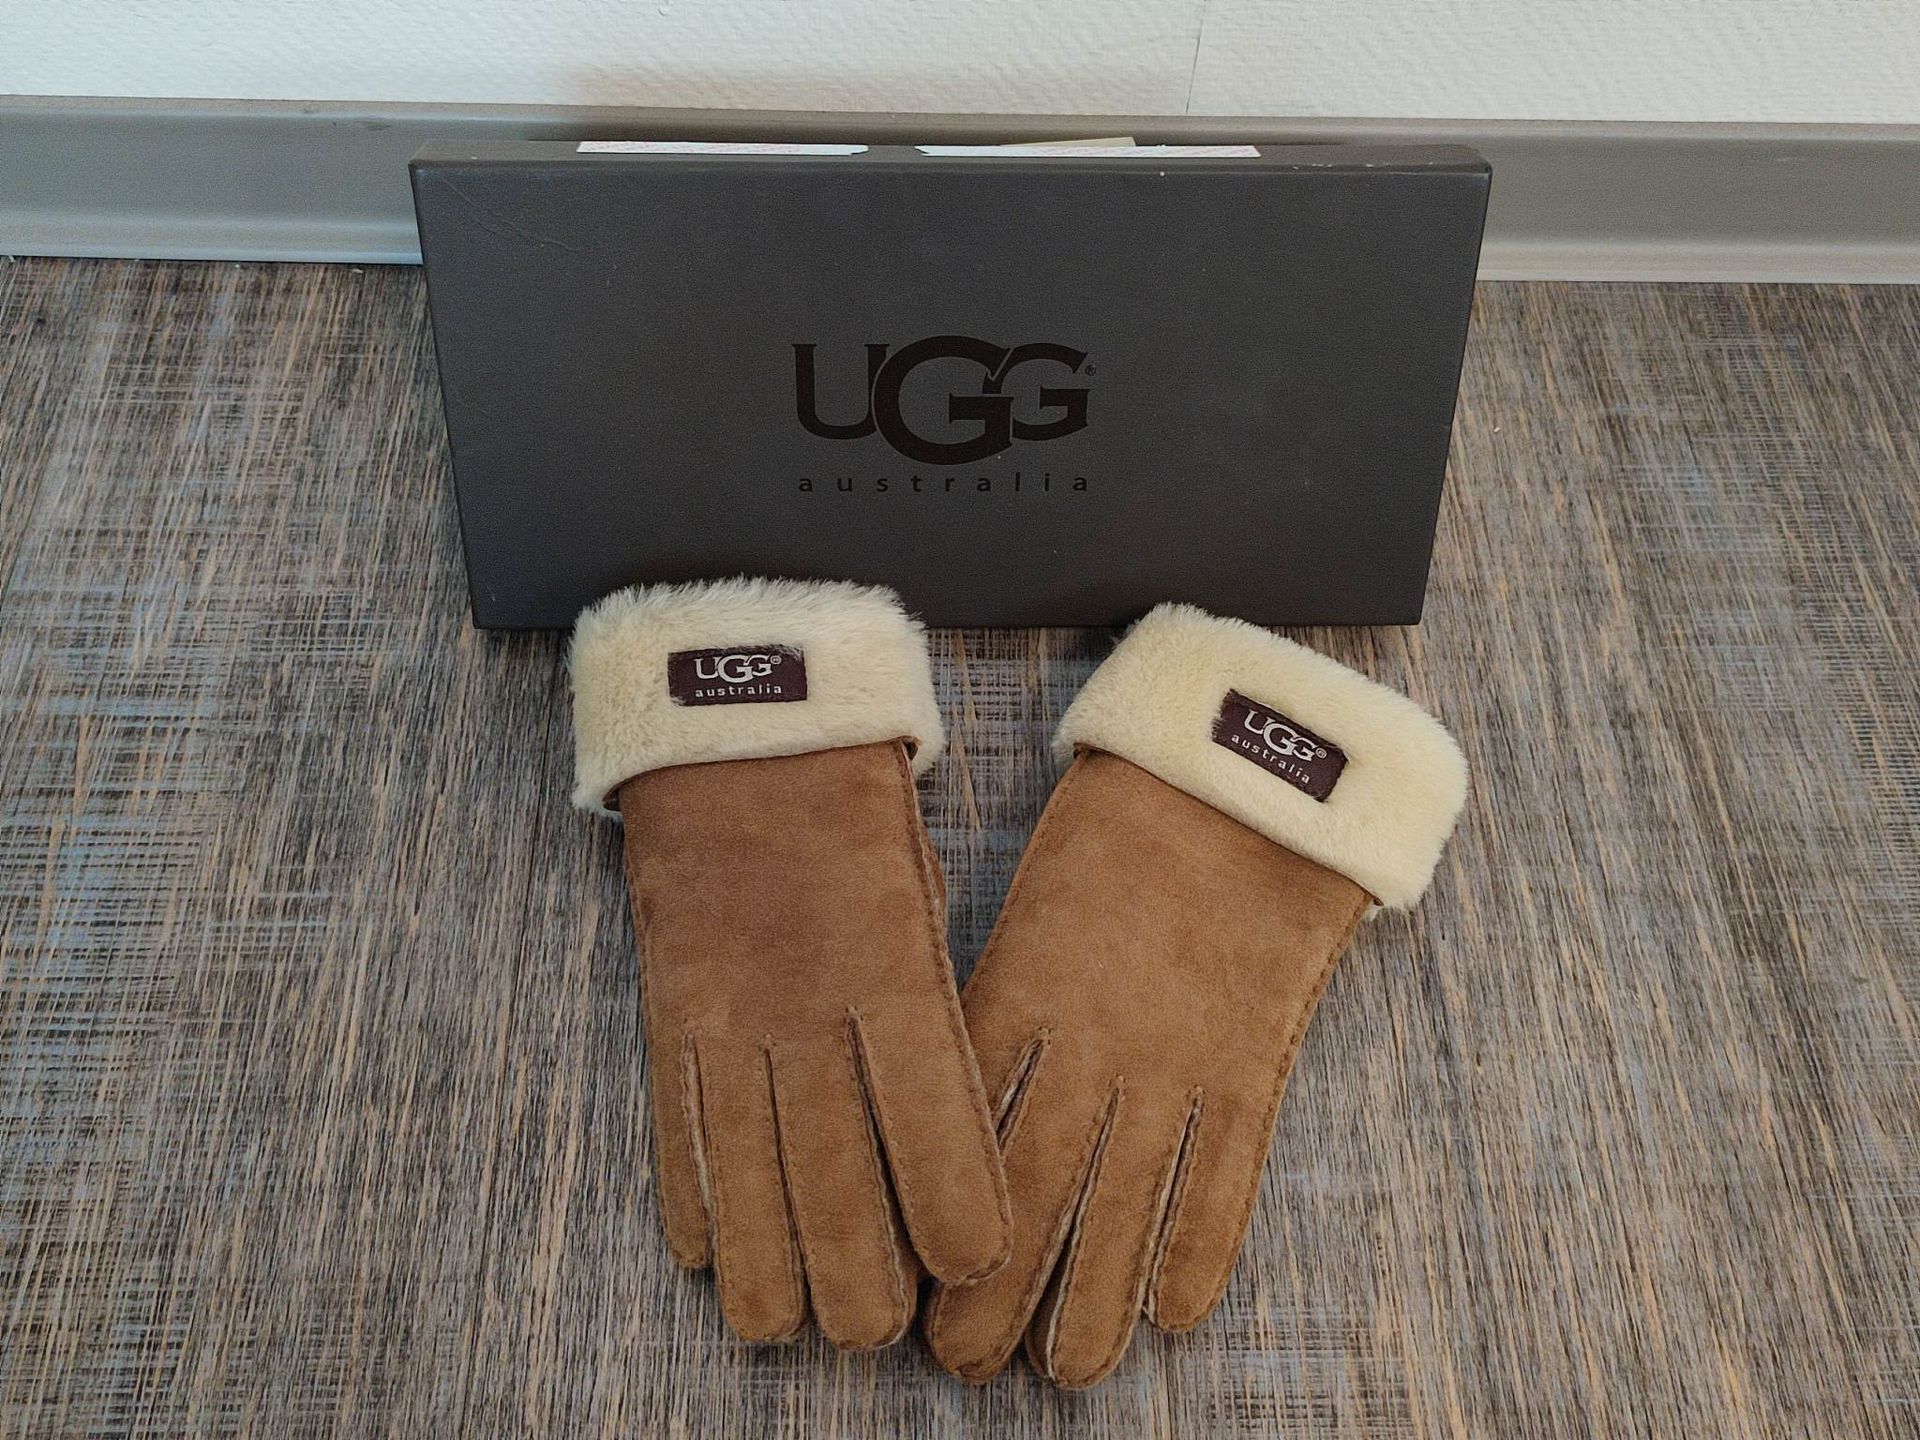 Null UGG. Pair of gloves model TURN CUFF, size S, camel color, 
used condition, &hellip;